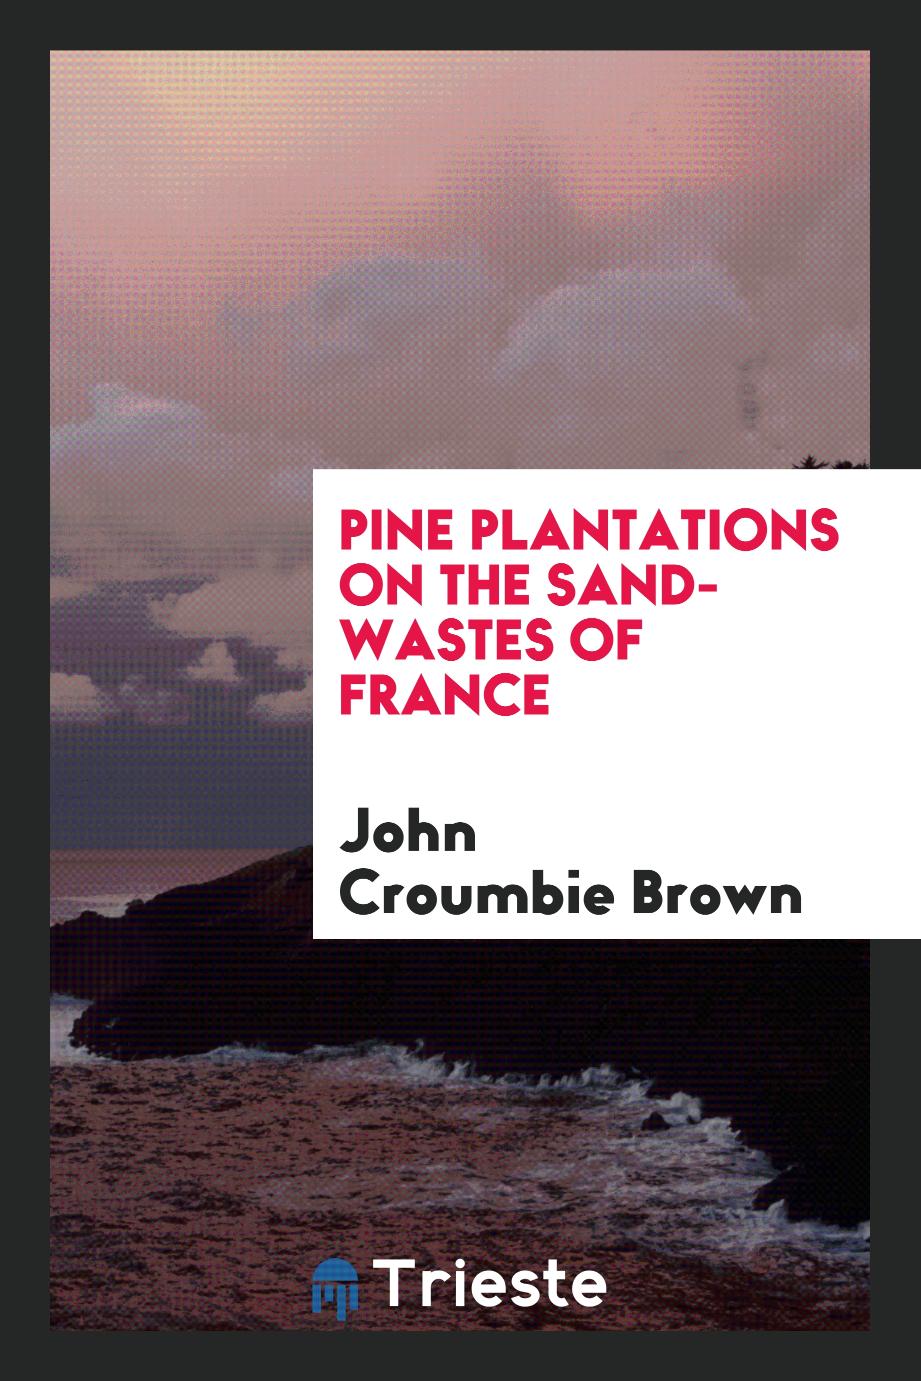 Pine Plantations on the Sand-Wastes of France